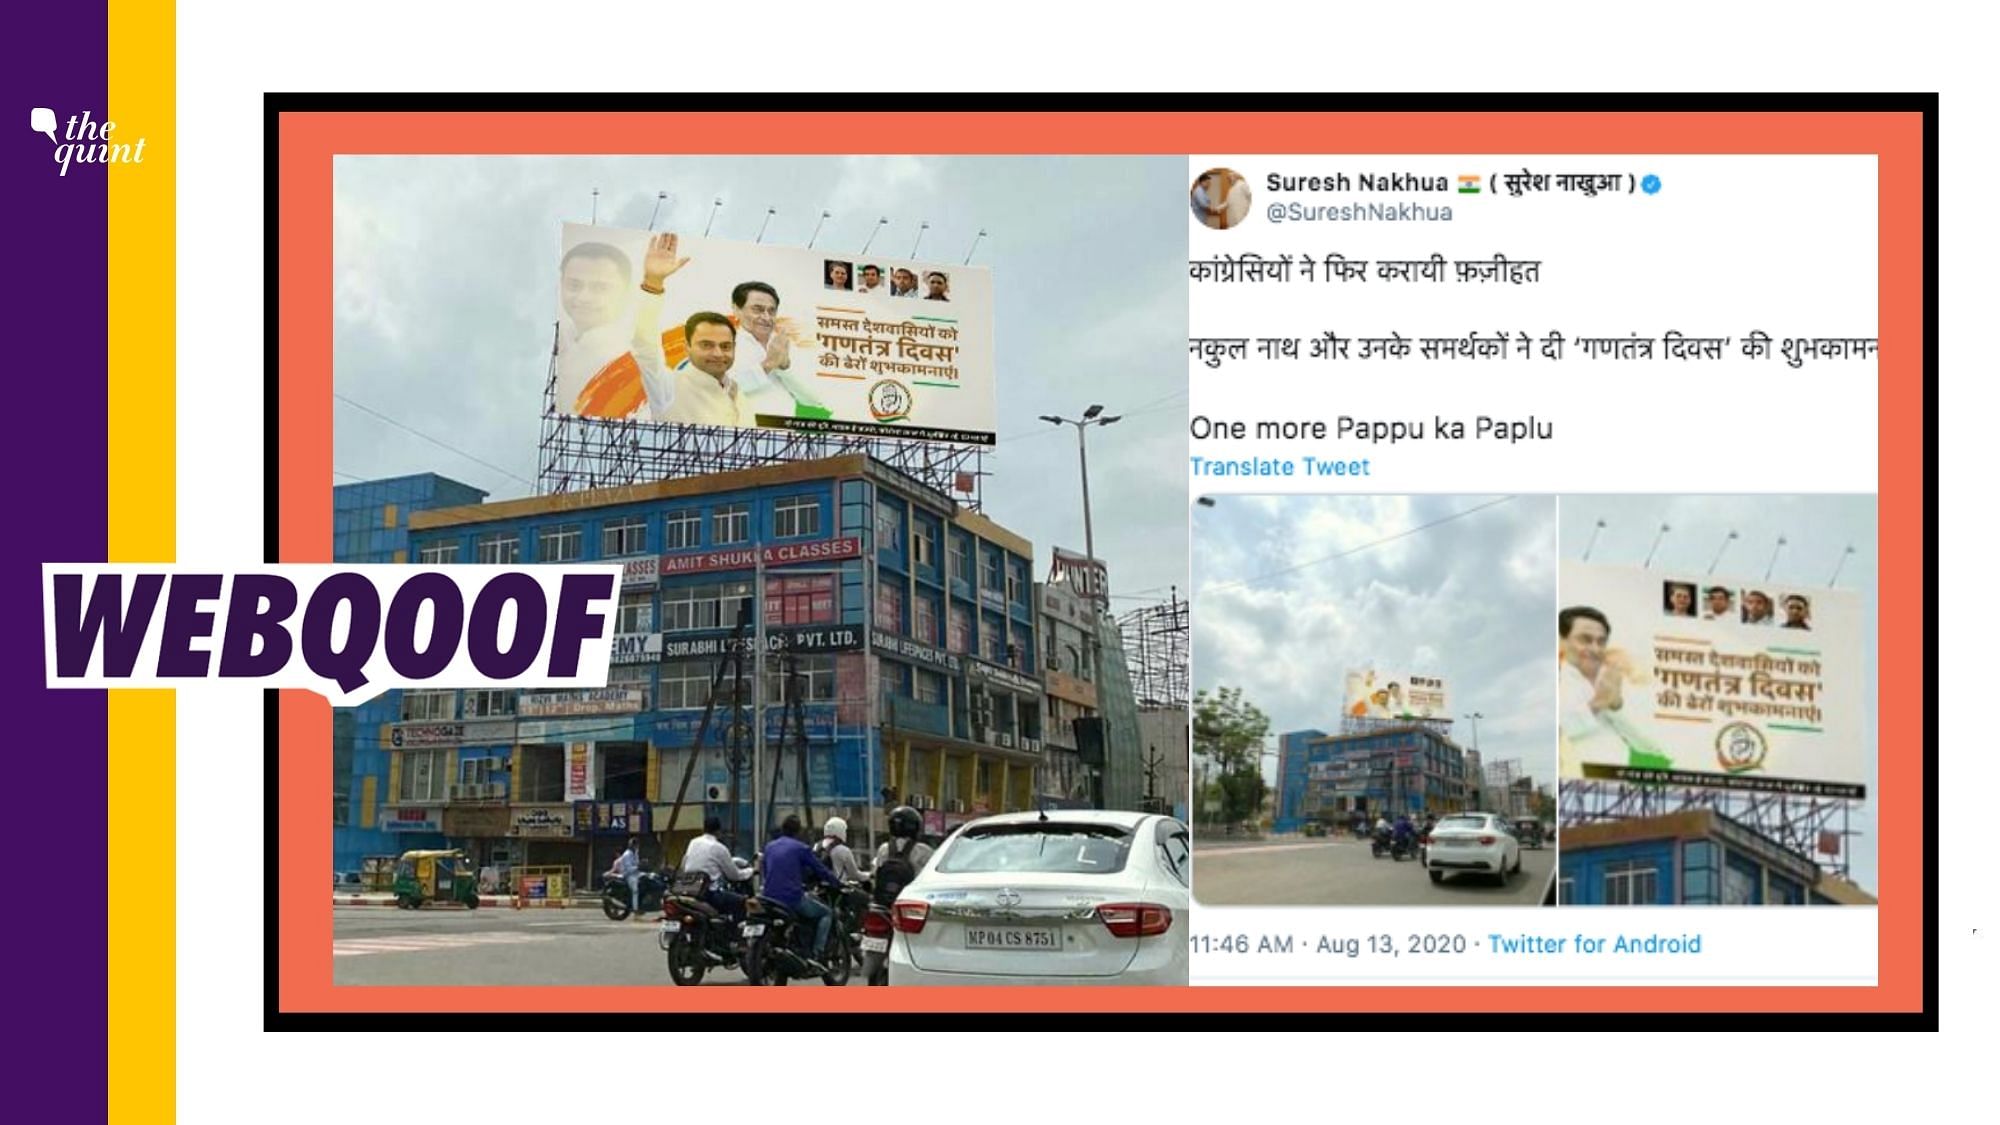 The viral image tweeted out by BJP spokesperson Suresh Nakhua, in a bid to mock Congress for putting ‘Republic Day’ billboards ahead of Independence Day celebrations, is fake.